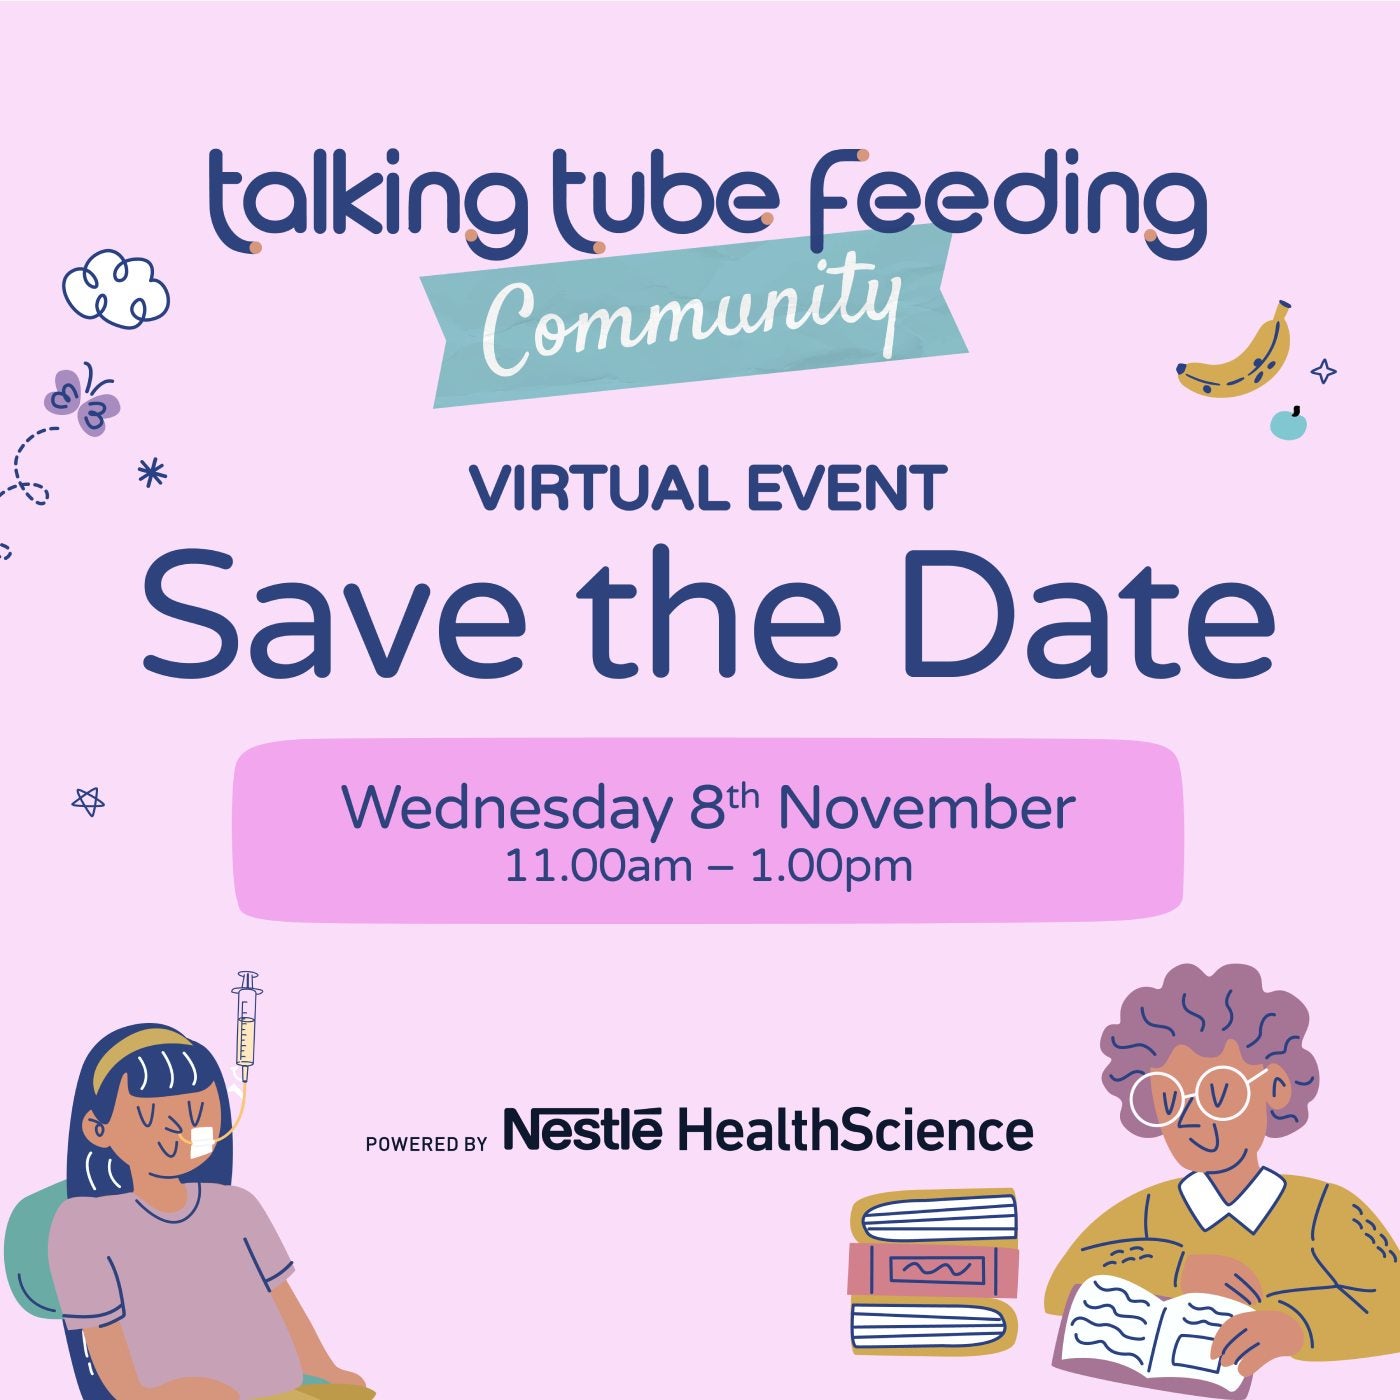 VIRTUAL EVENT SAVE THE DATE